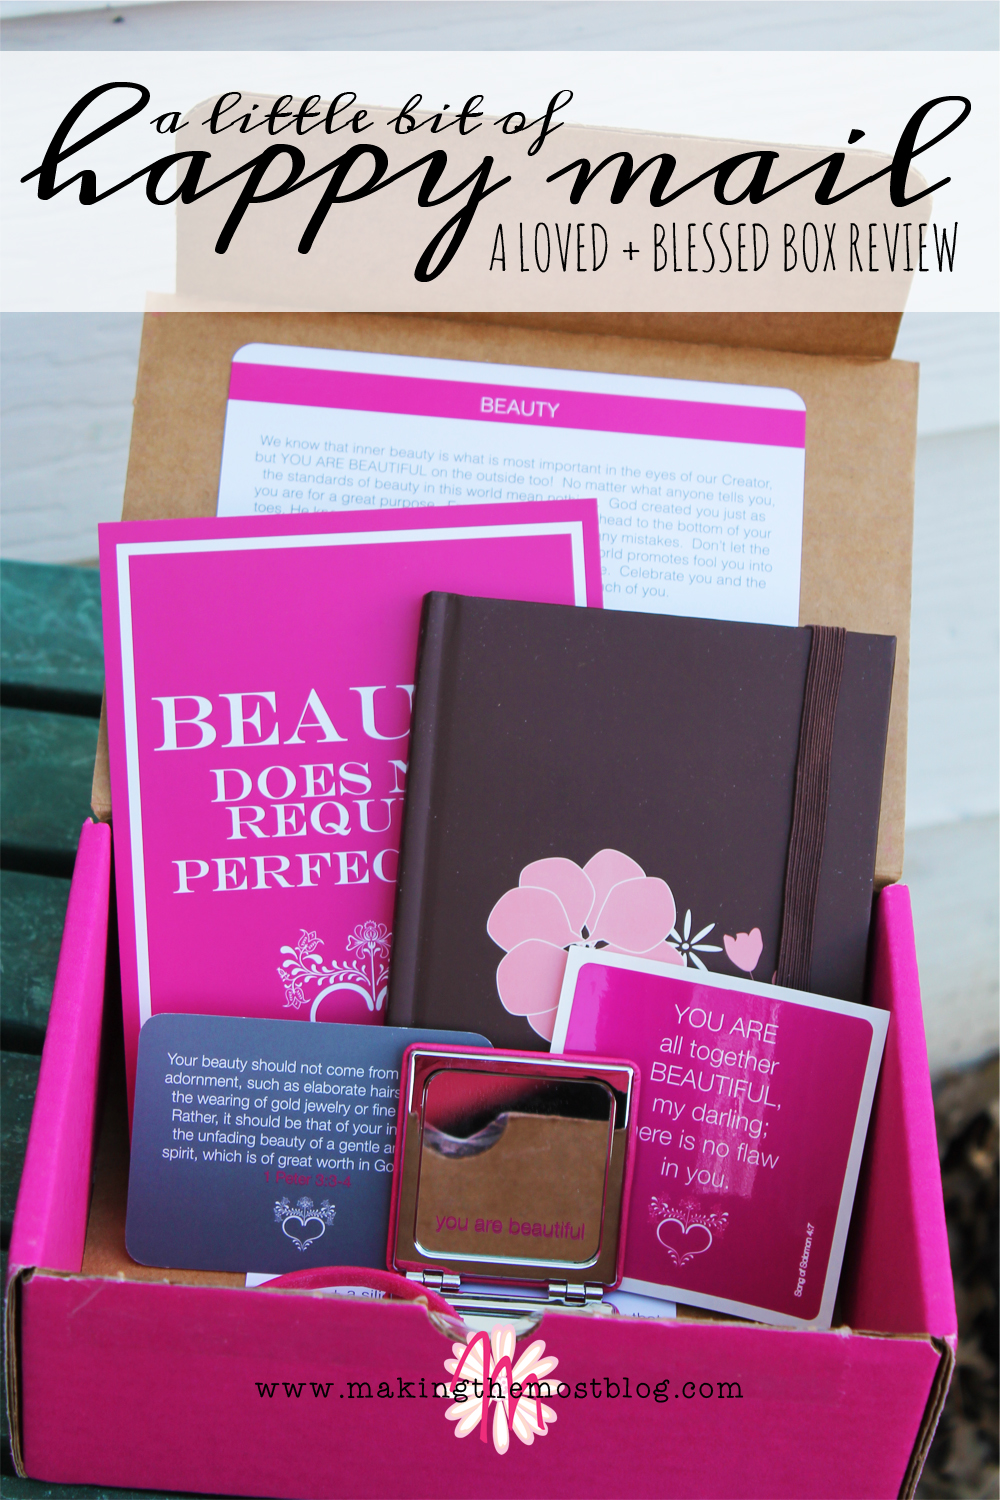 A Little Bit of Happy Mail: Loved + Blessed Subscription Box Review | Making the Most Blog